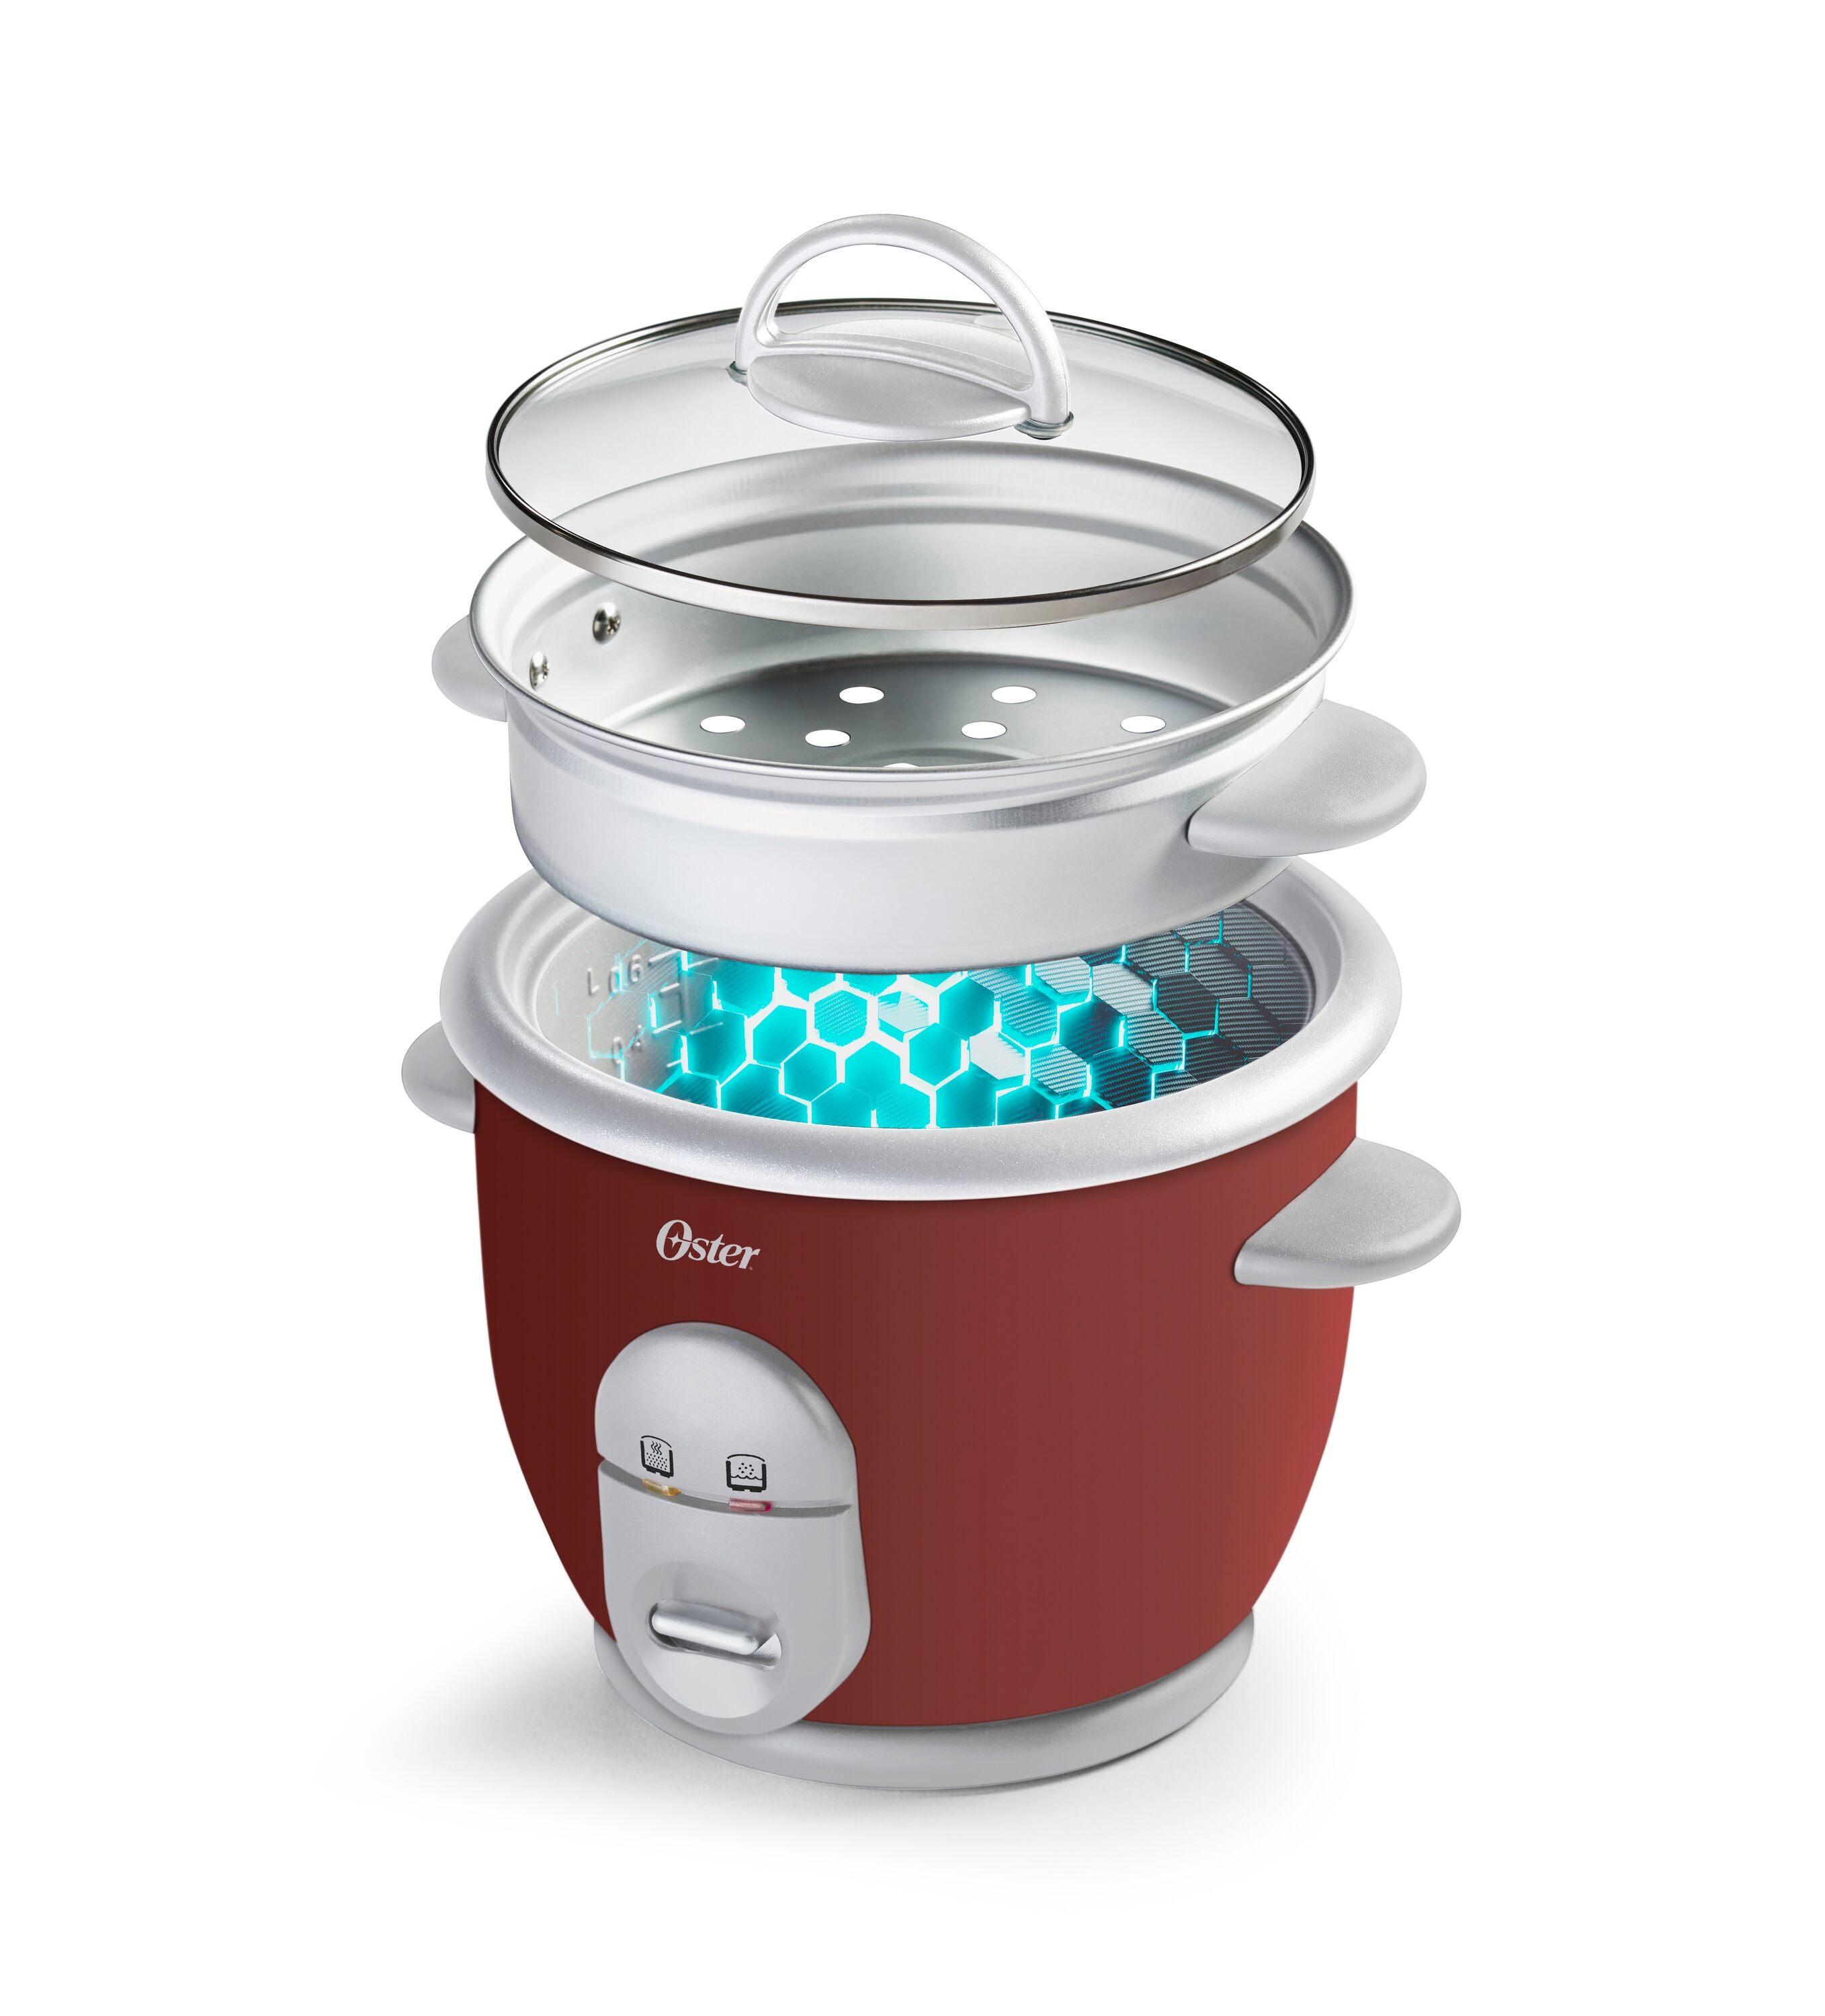 Oster 3-cup rice cooker with steam tray - $17, great price!